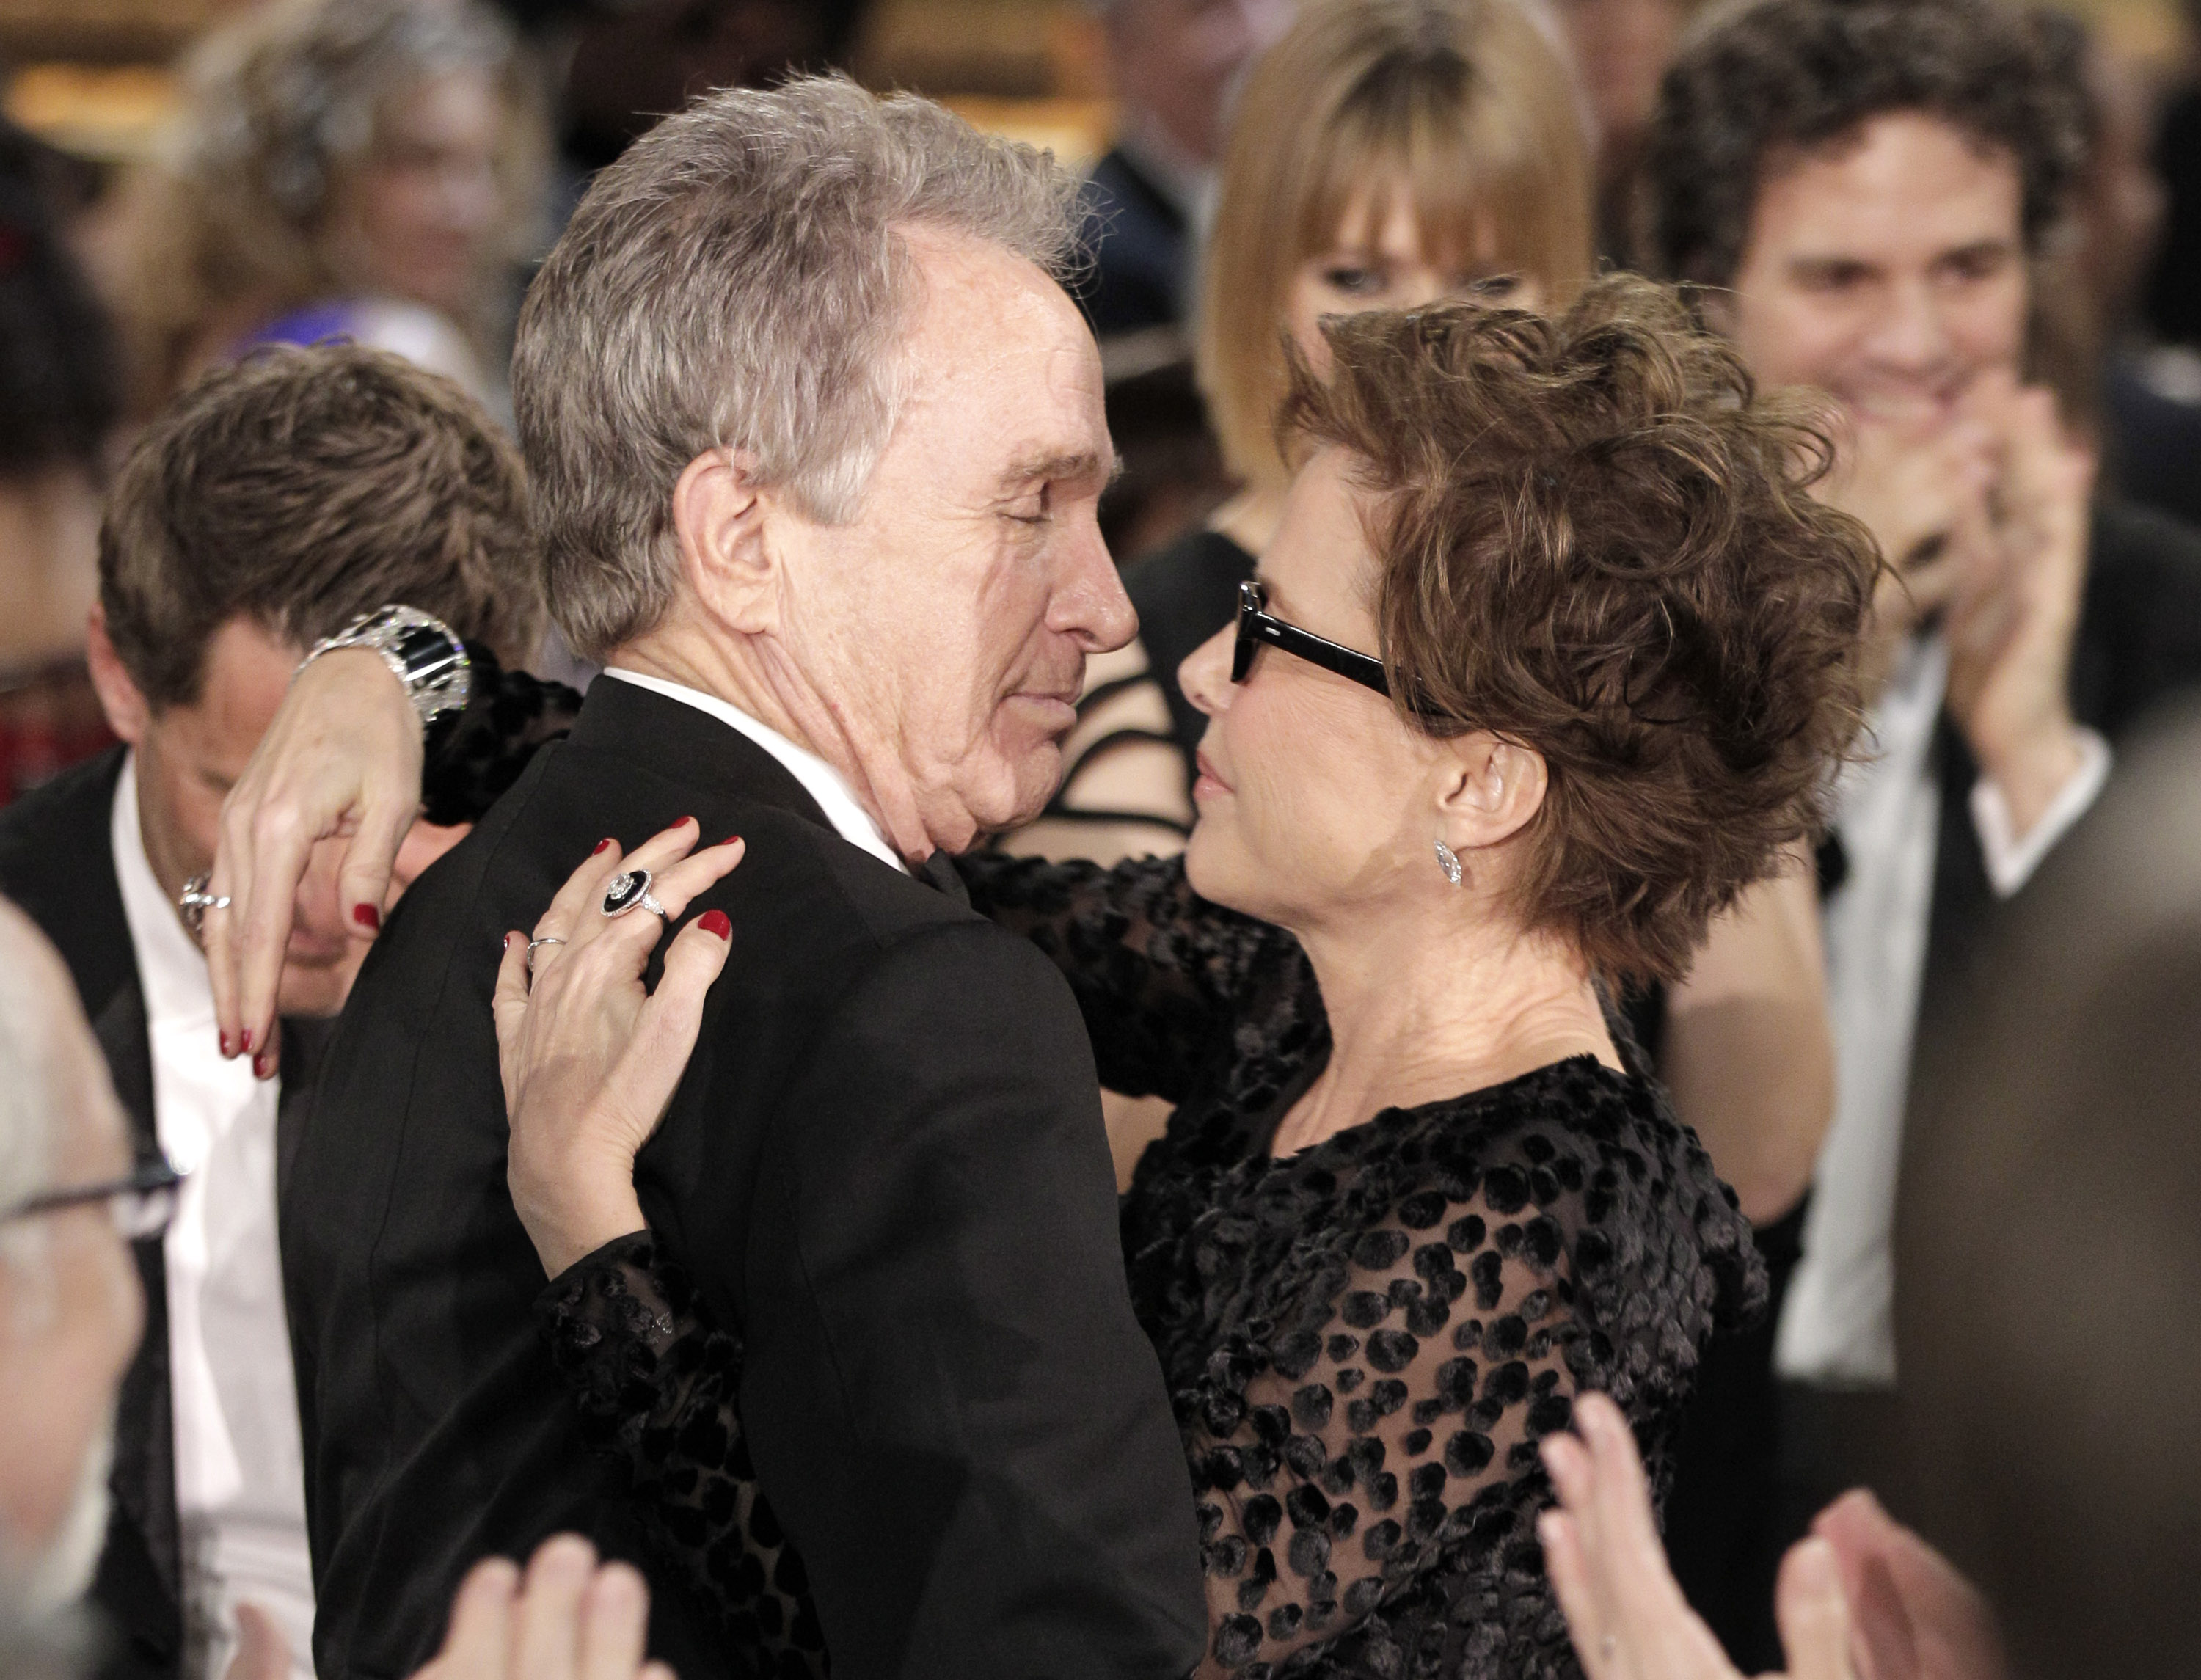 Warren Beatty and his wife Annette Bening during the 68th Annual Golden Globe Awards at the Beverly Hilton Hotel on January 16, 2011 | Source: Getty Images